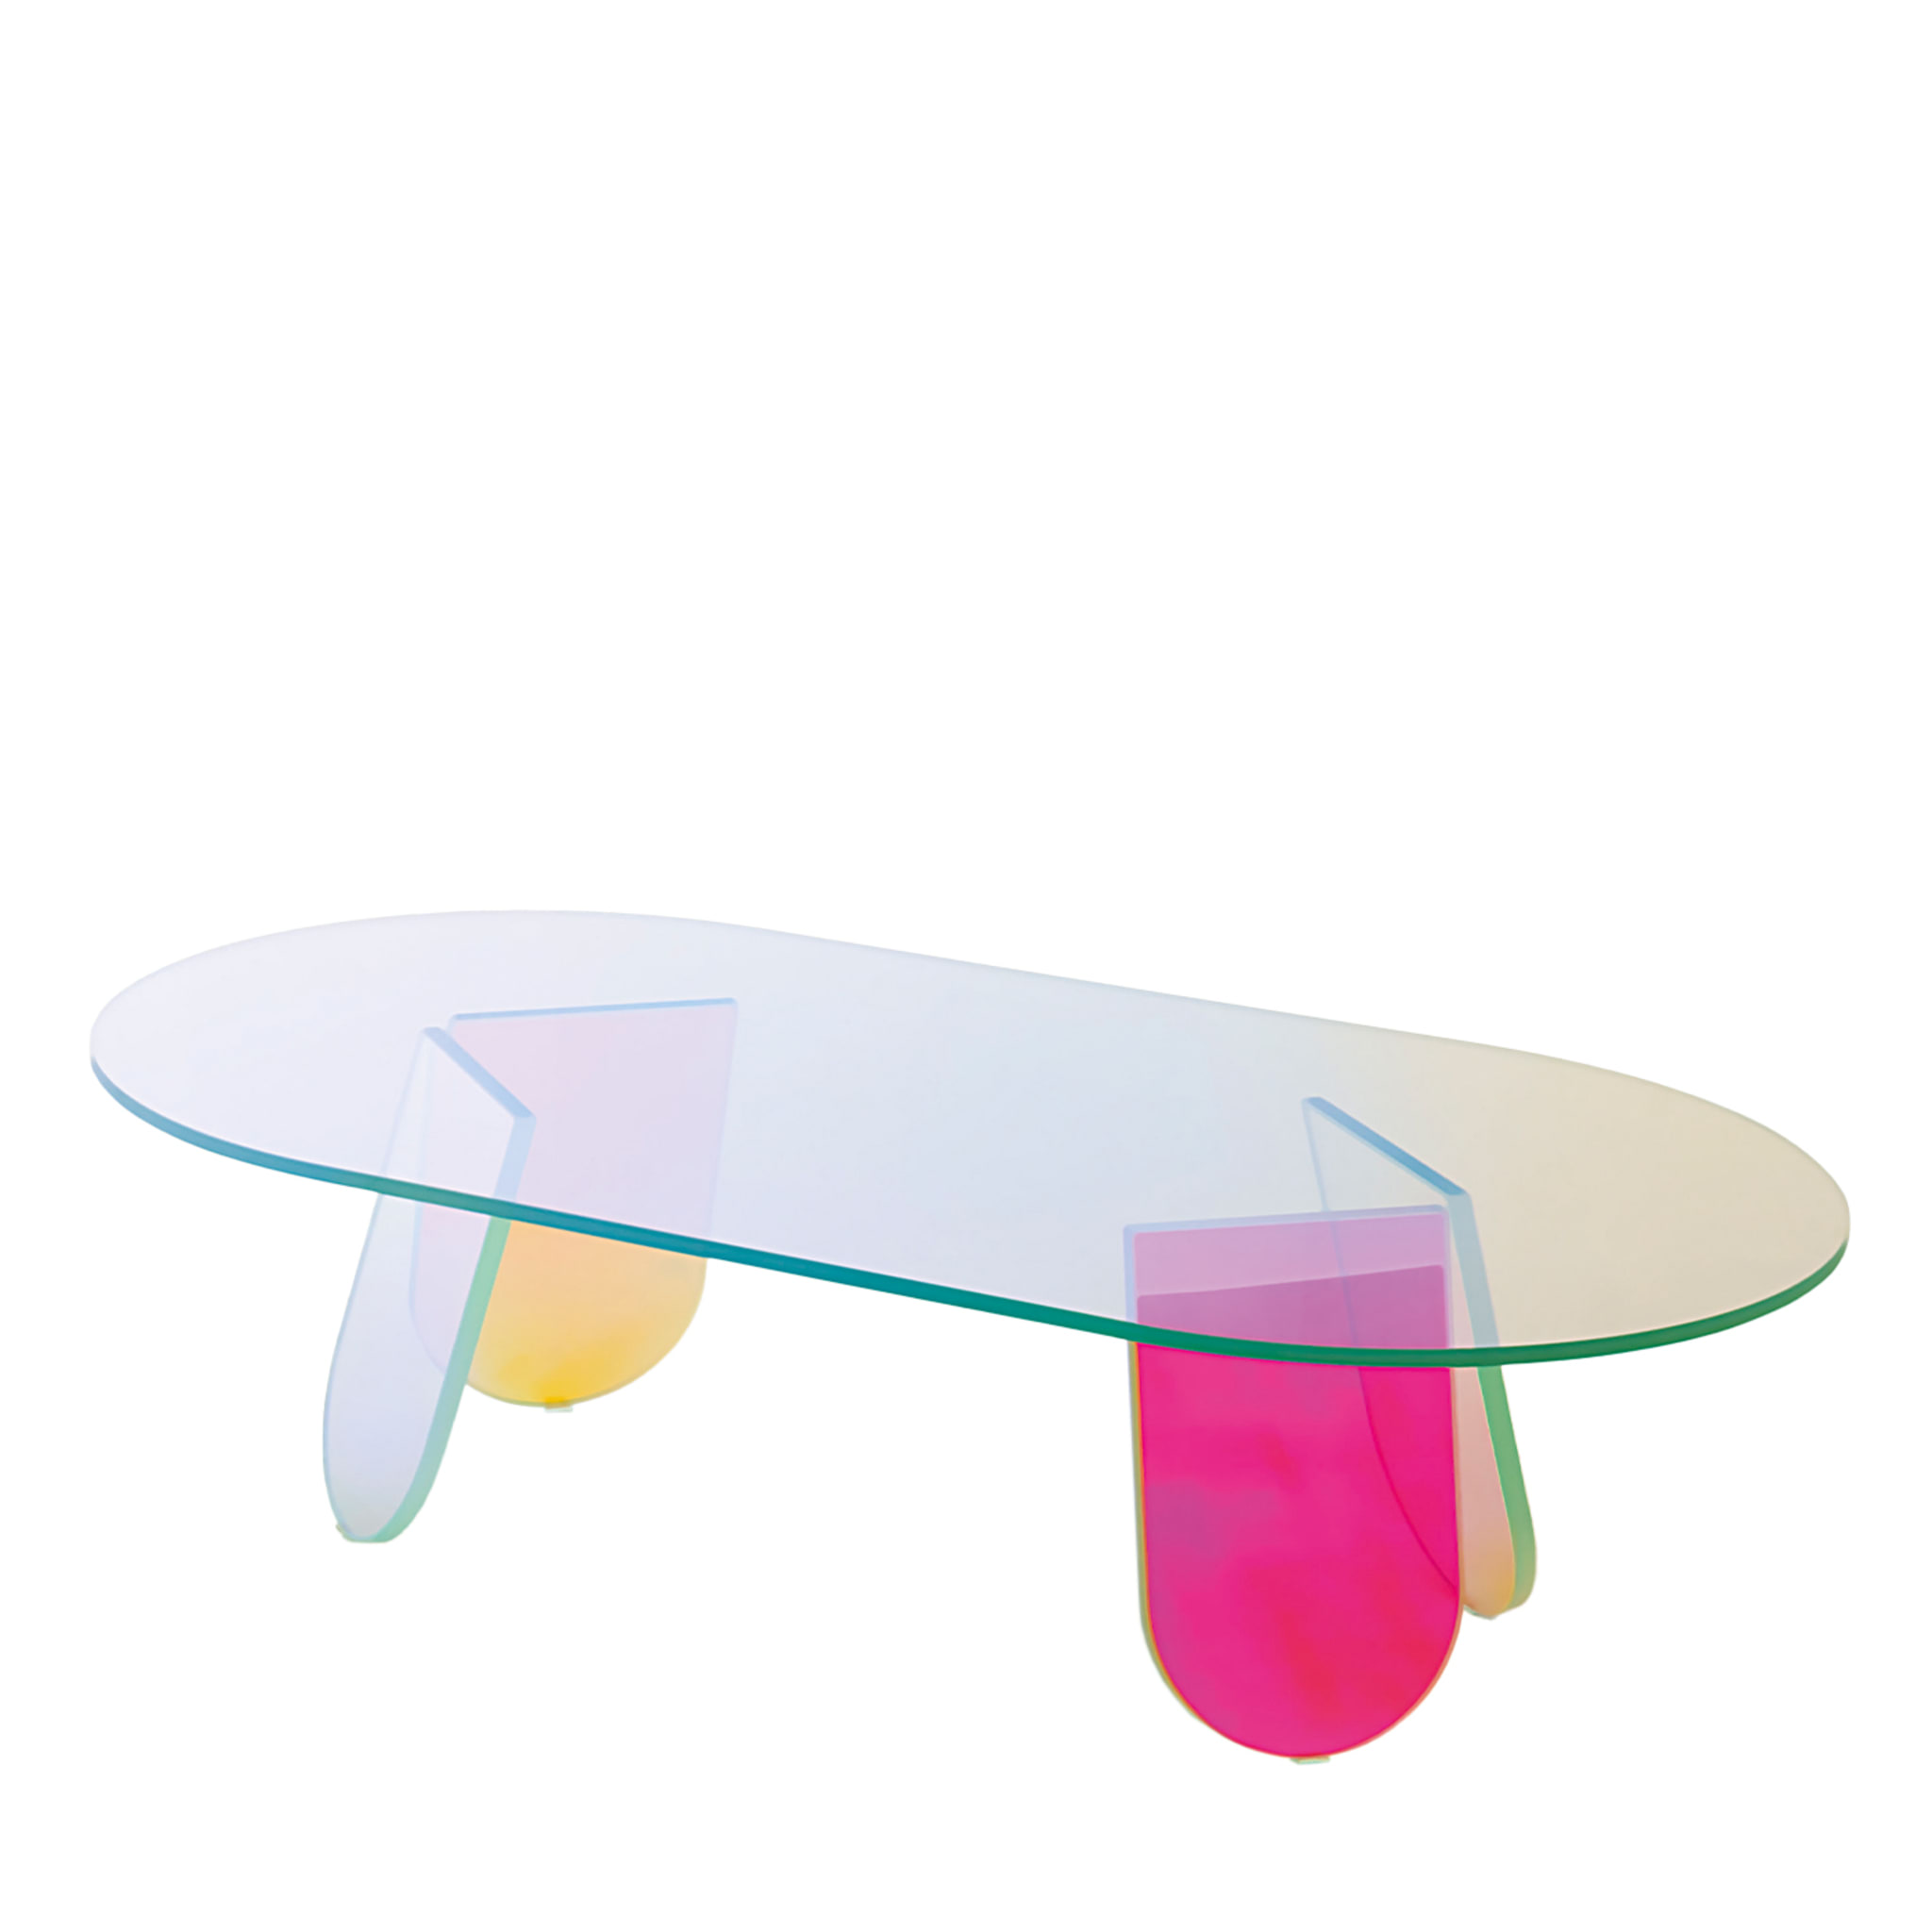 Shimmer Large Low Table by Patricia Urquiola - Main view